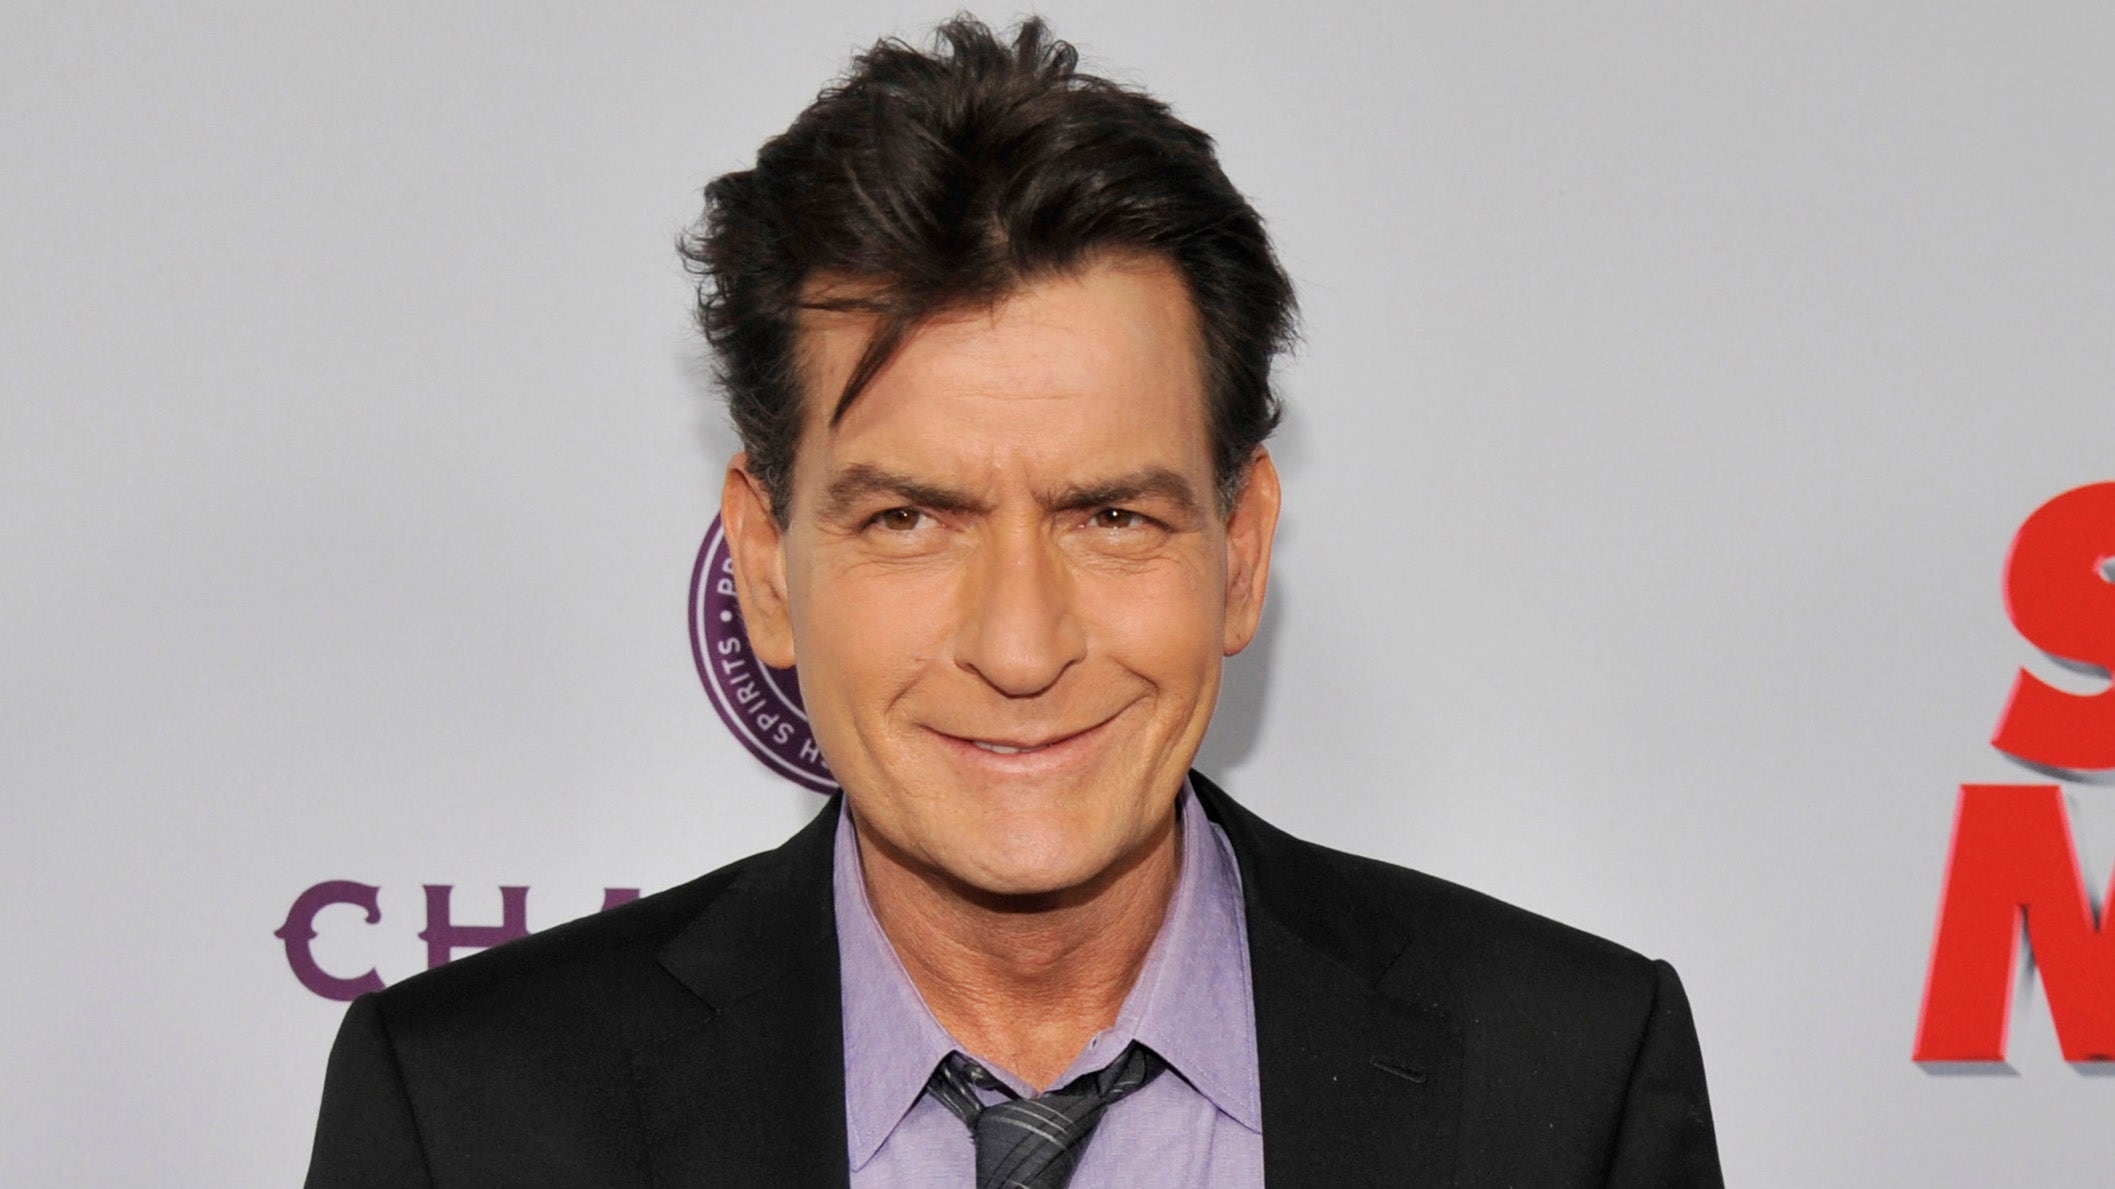 Charlie Sheen says Brian Williams is victim of a vile witch hunt, calls NBC heads cowards Fox News picture